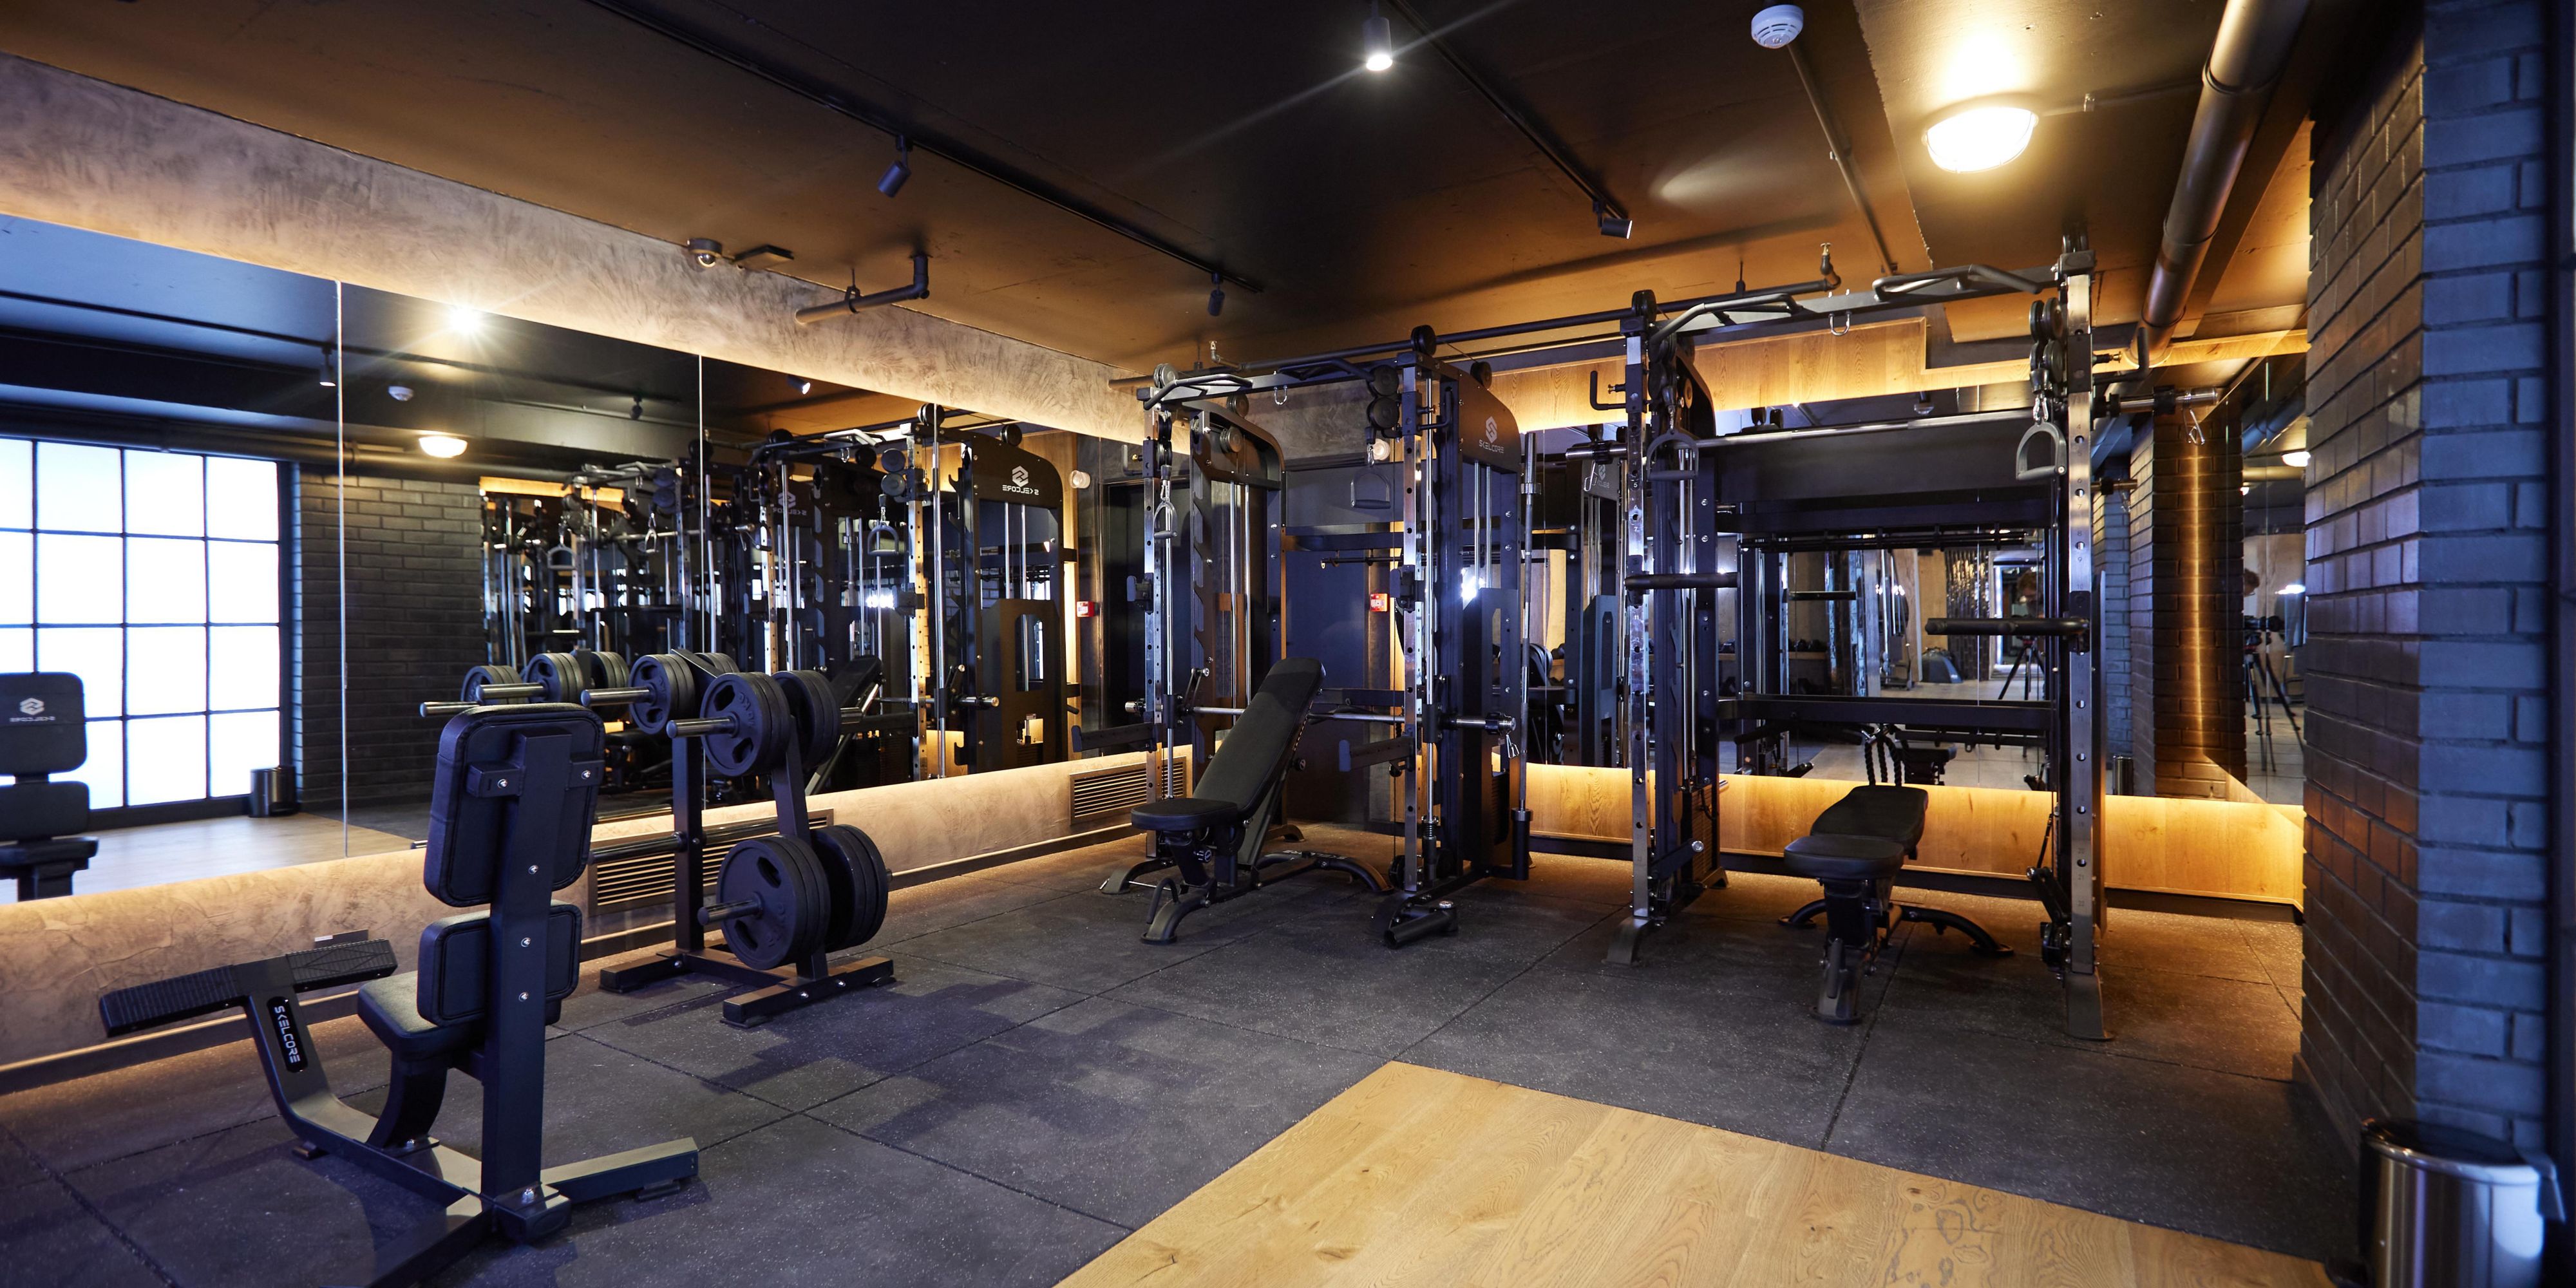 Enjoy the facilities of our upgraded Gym facilities for a full workout in our dedicated Cardio, Strength and Fitness sections. Open 24 hours and complimentary access to all voco guests. 